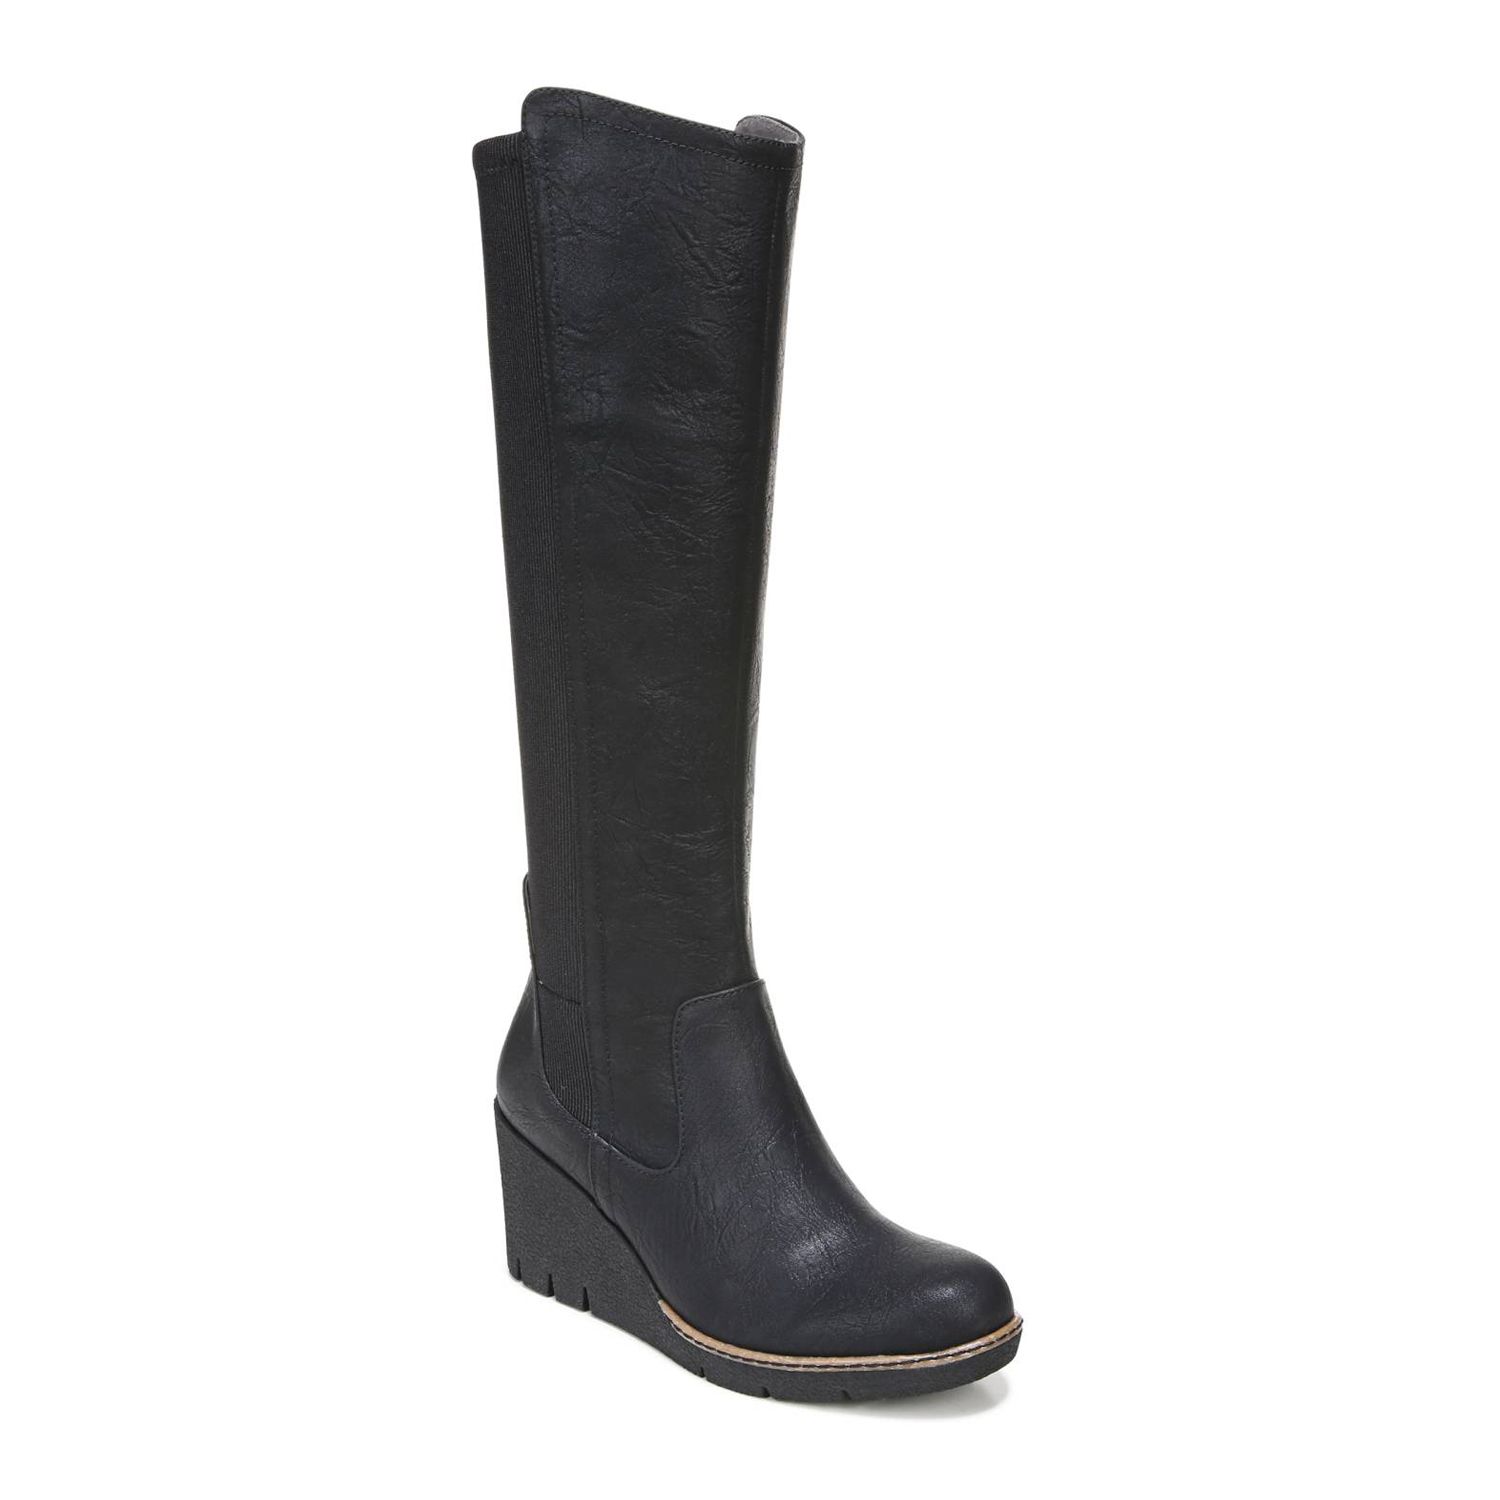 Image for Dr. Scholl's Lindy Women's Wedge Boots at Kohl's.